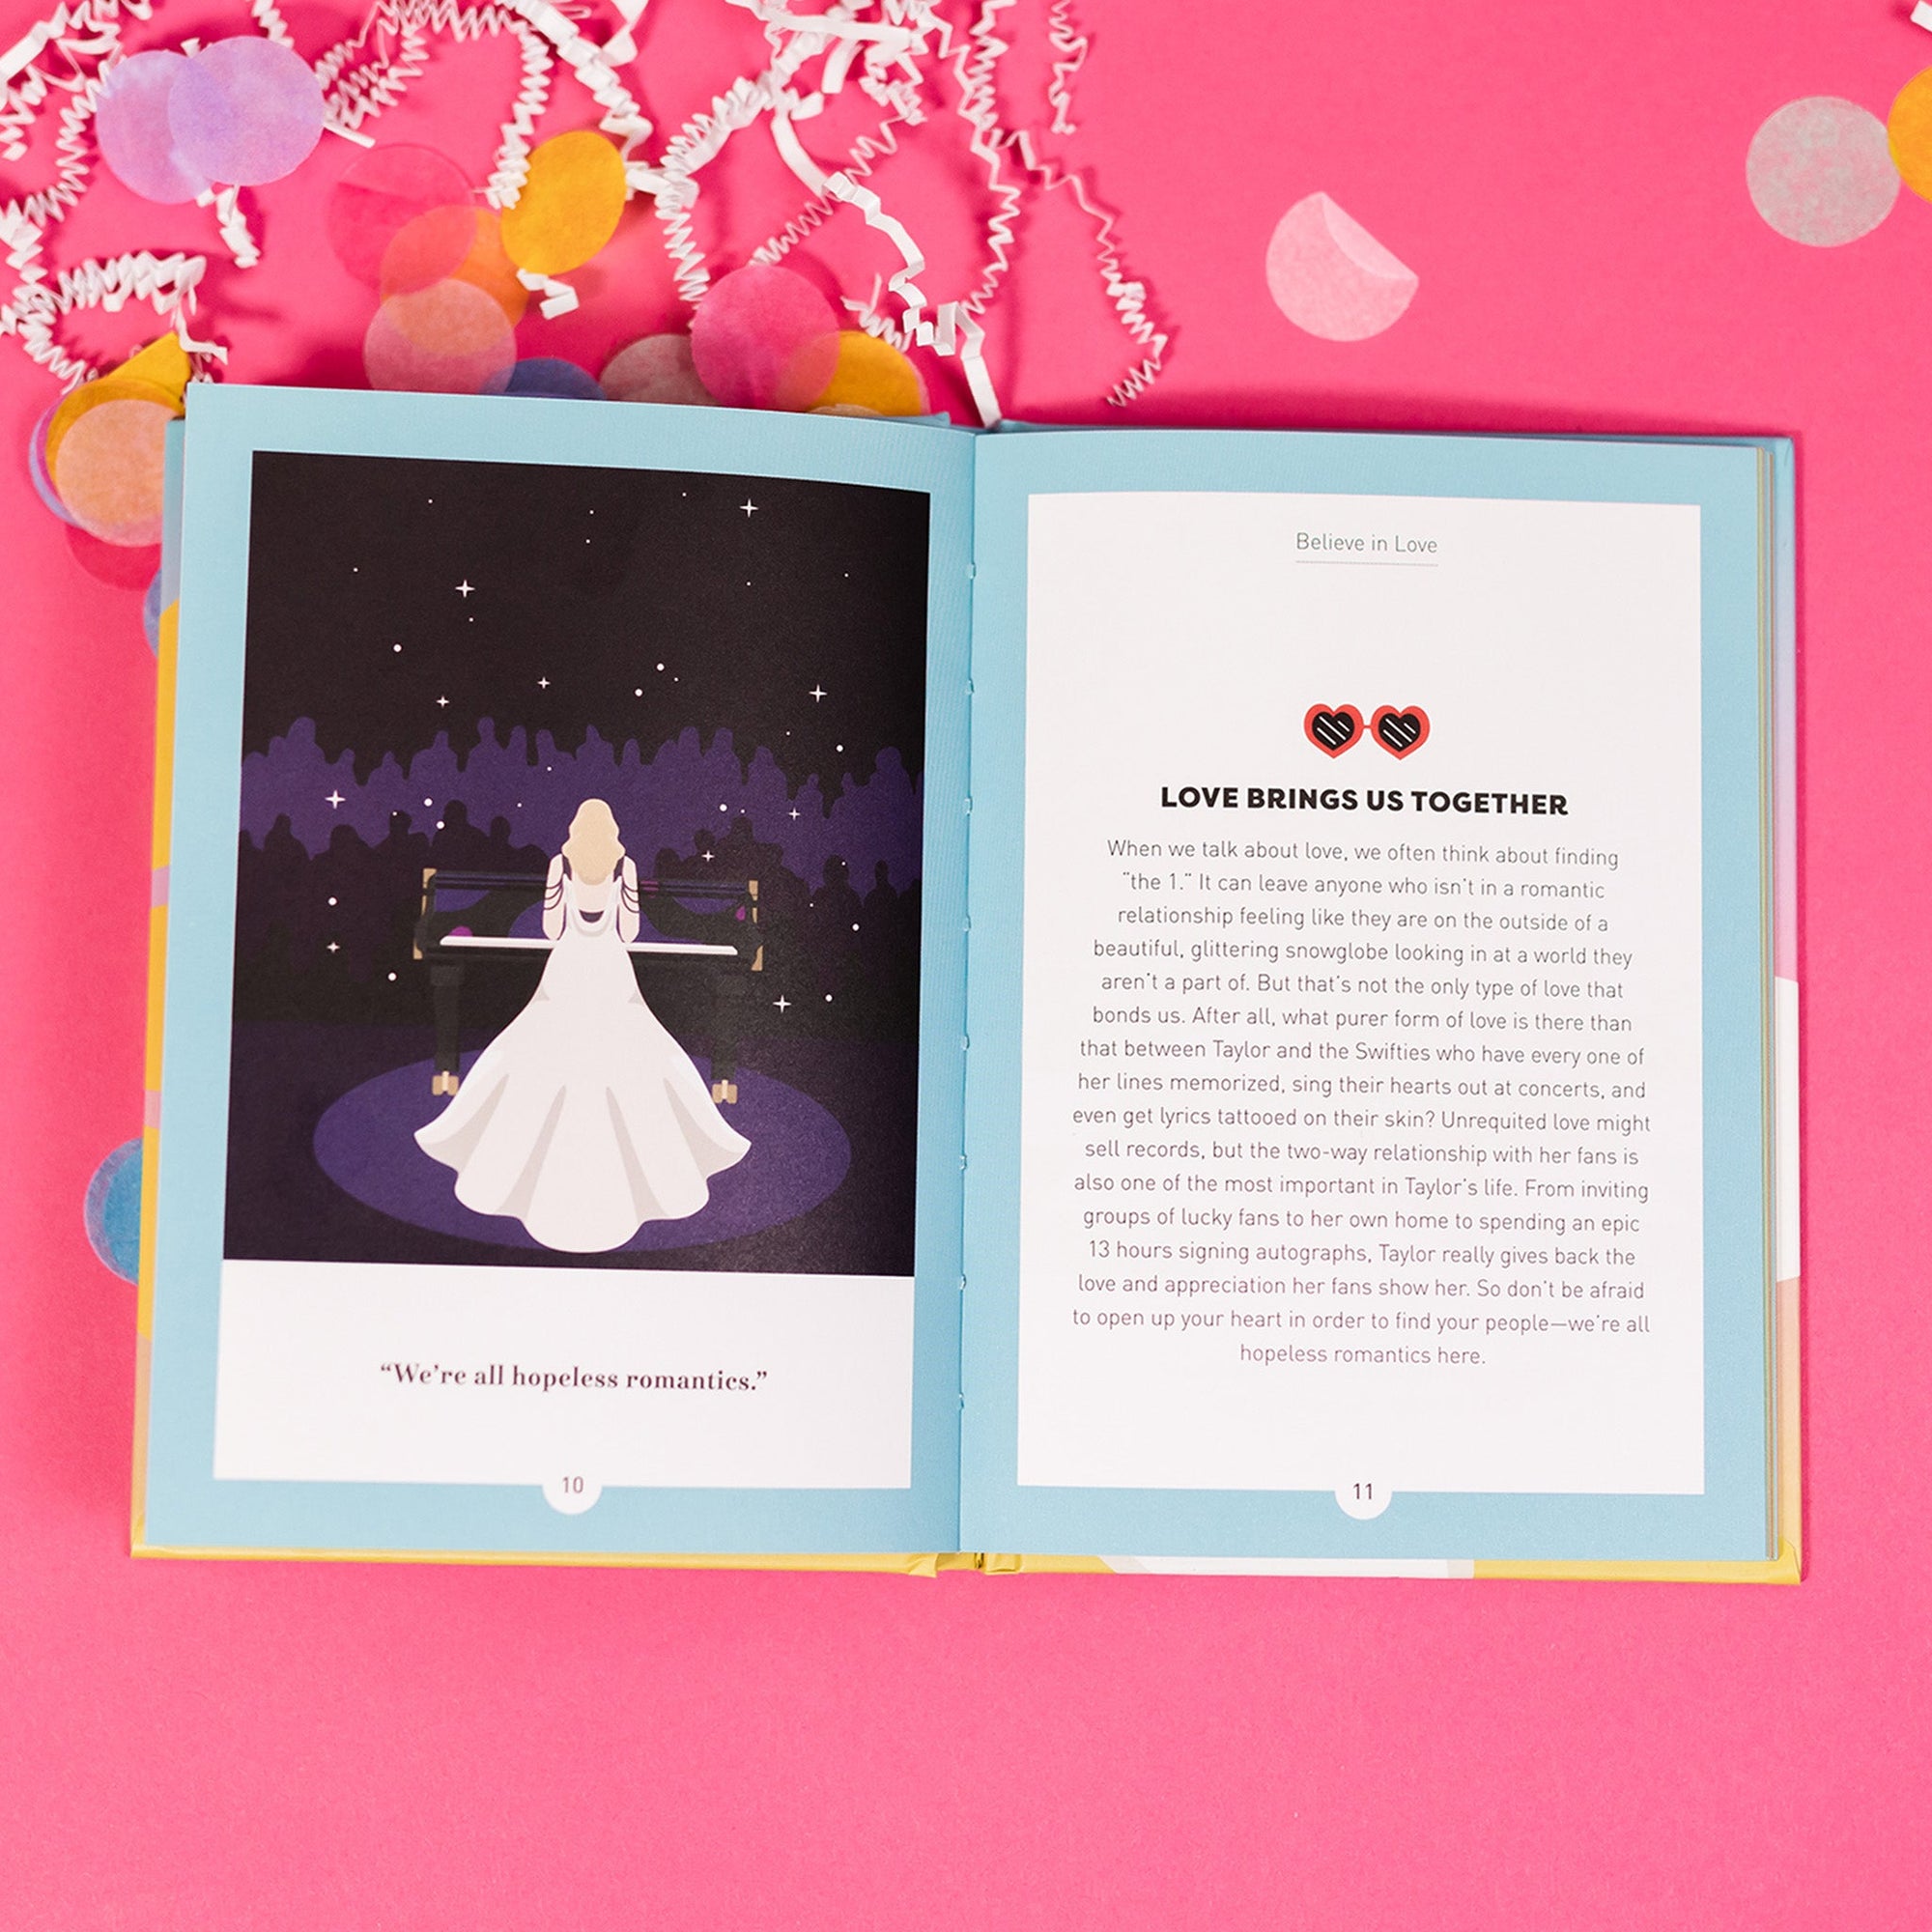 On a hot pink background sits an opened book with white crinkle and big, colorful confetti scattered around. There are mini disco balls. This Taylor Swift inspired, colorful picture book has an illustration of Taylor Swift's wearing a long white dress on the left page and it says "We're all hopeless romantics." On the right page it says "Believe in Love" with a pair of heat sunglasses and there is a paragraph titled "LOVE BRINGS US TOGETHER."